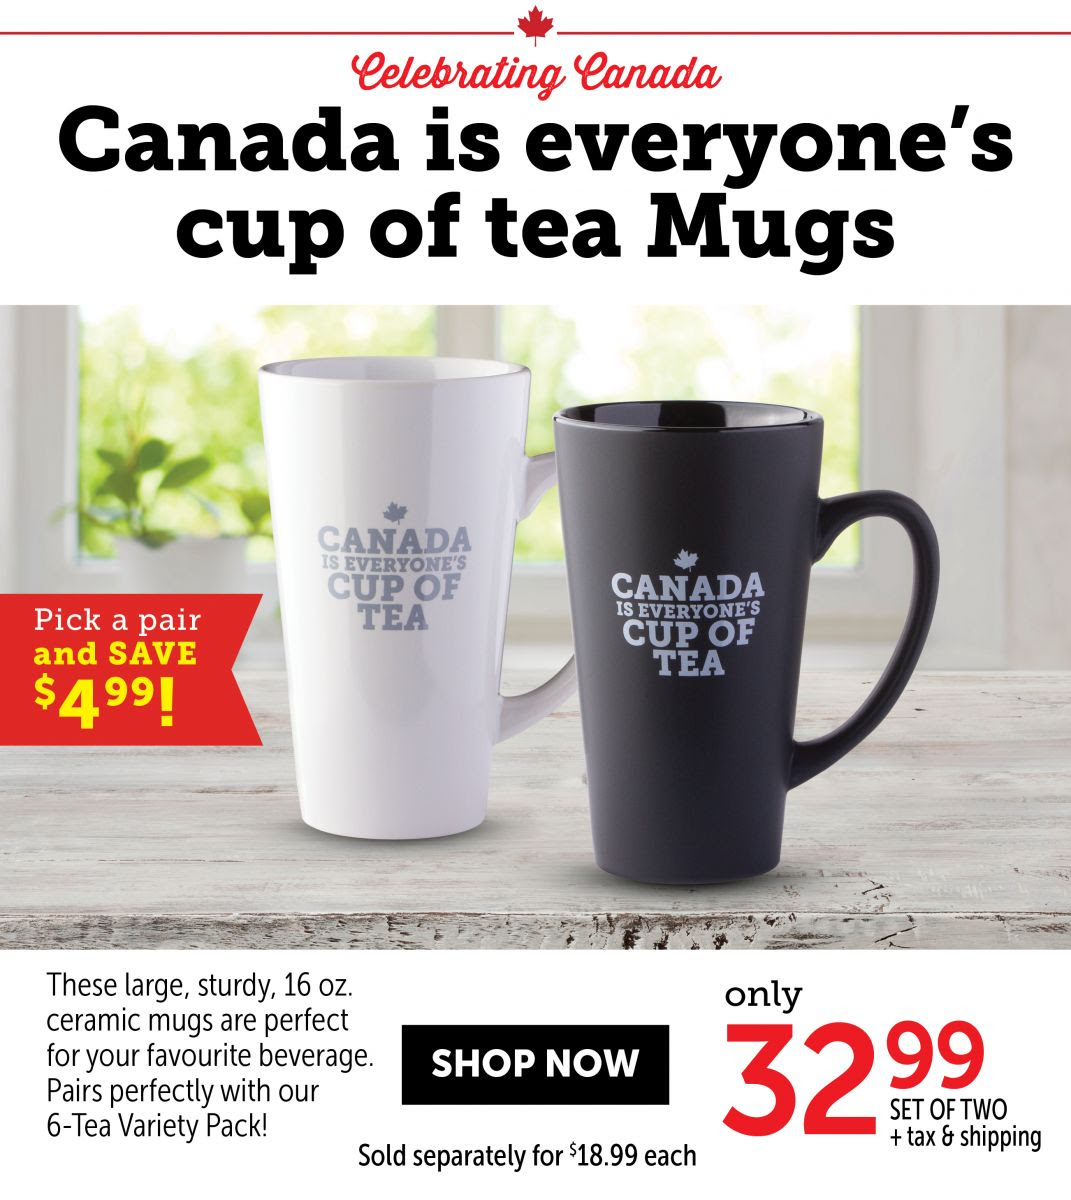 Canada is everyone’s cup of tea mug – Set of two 